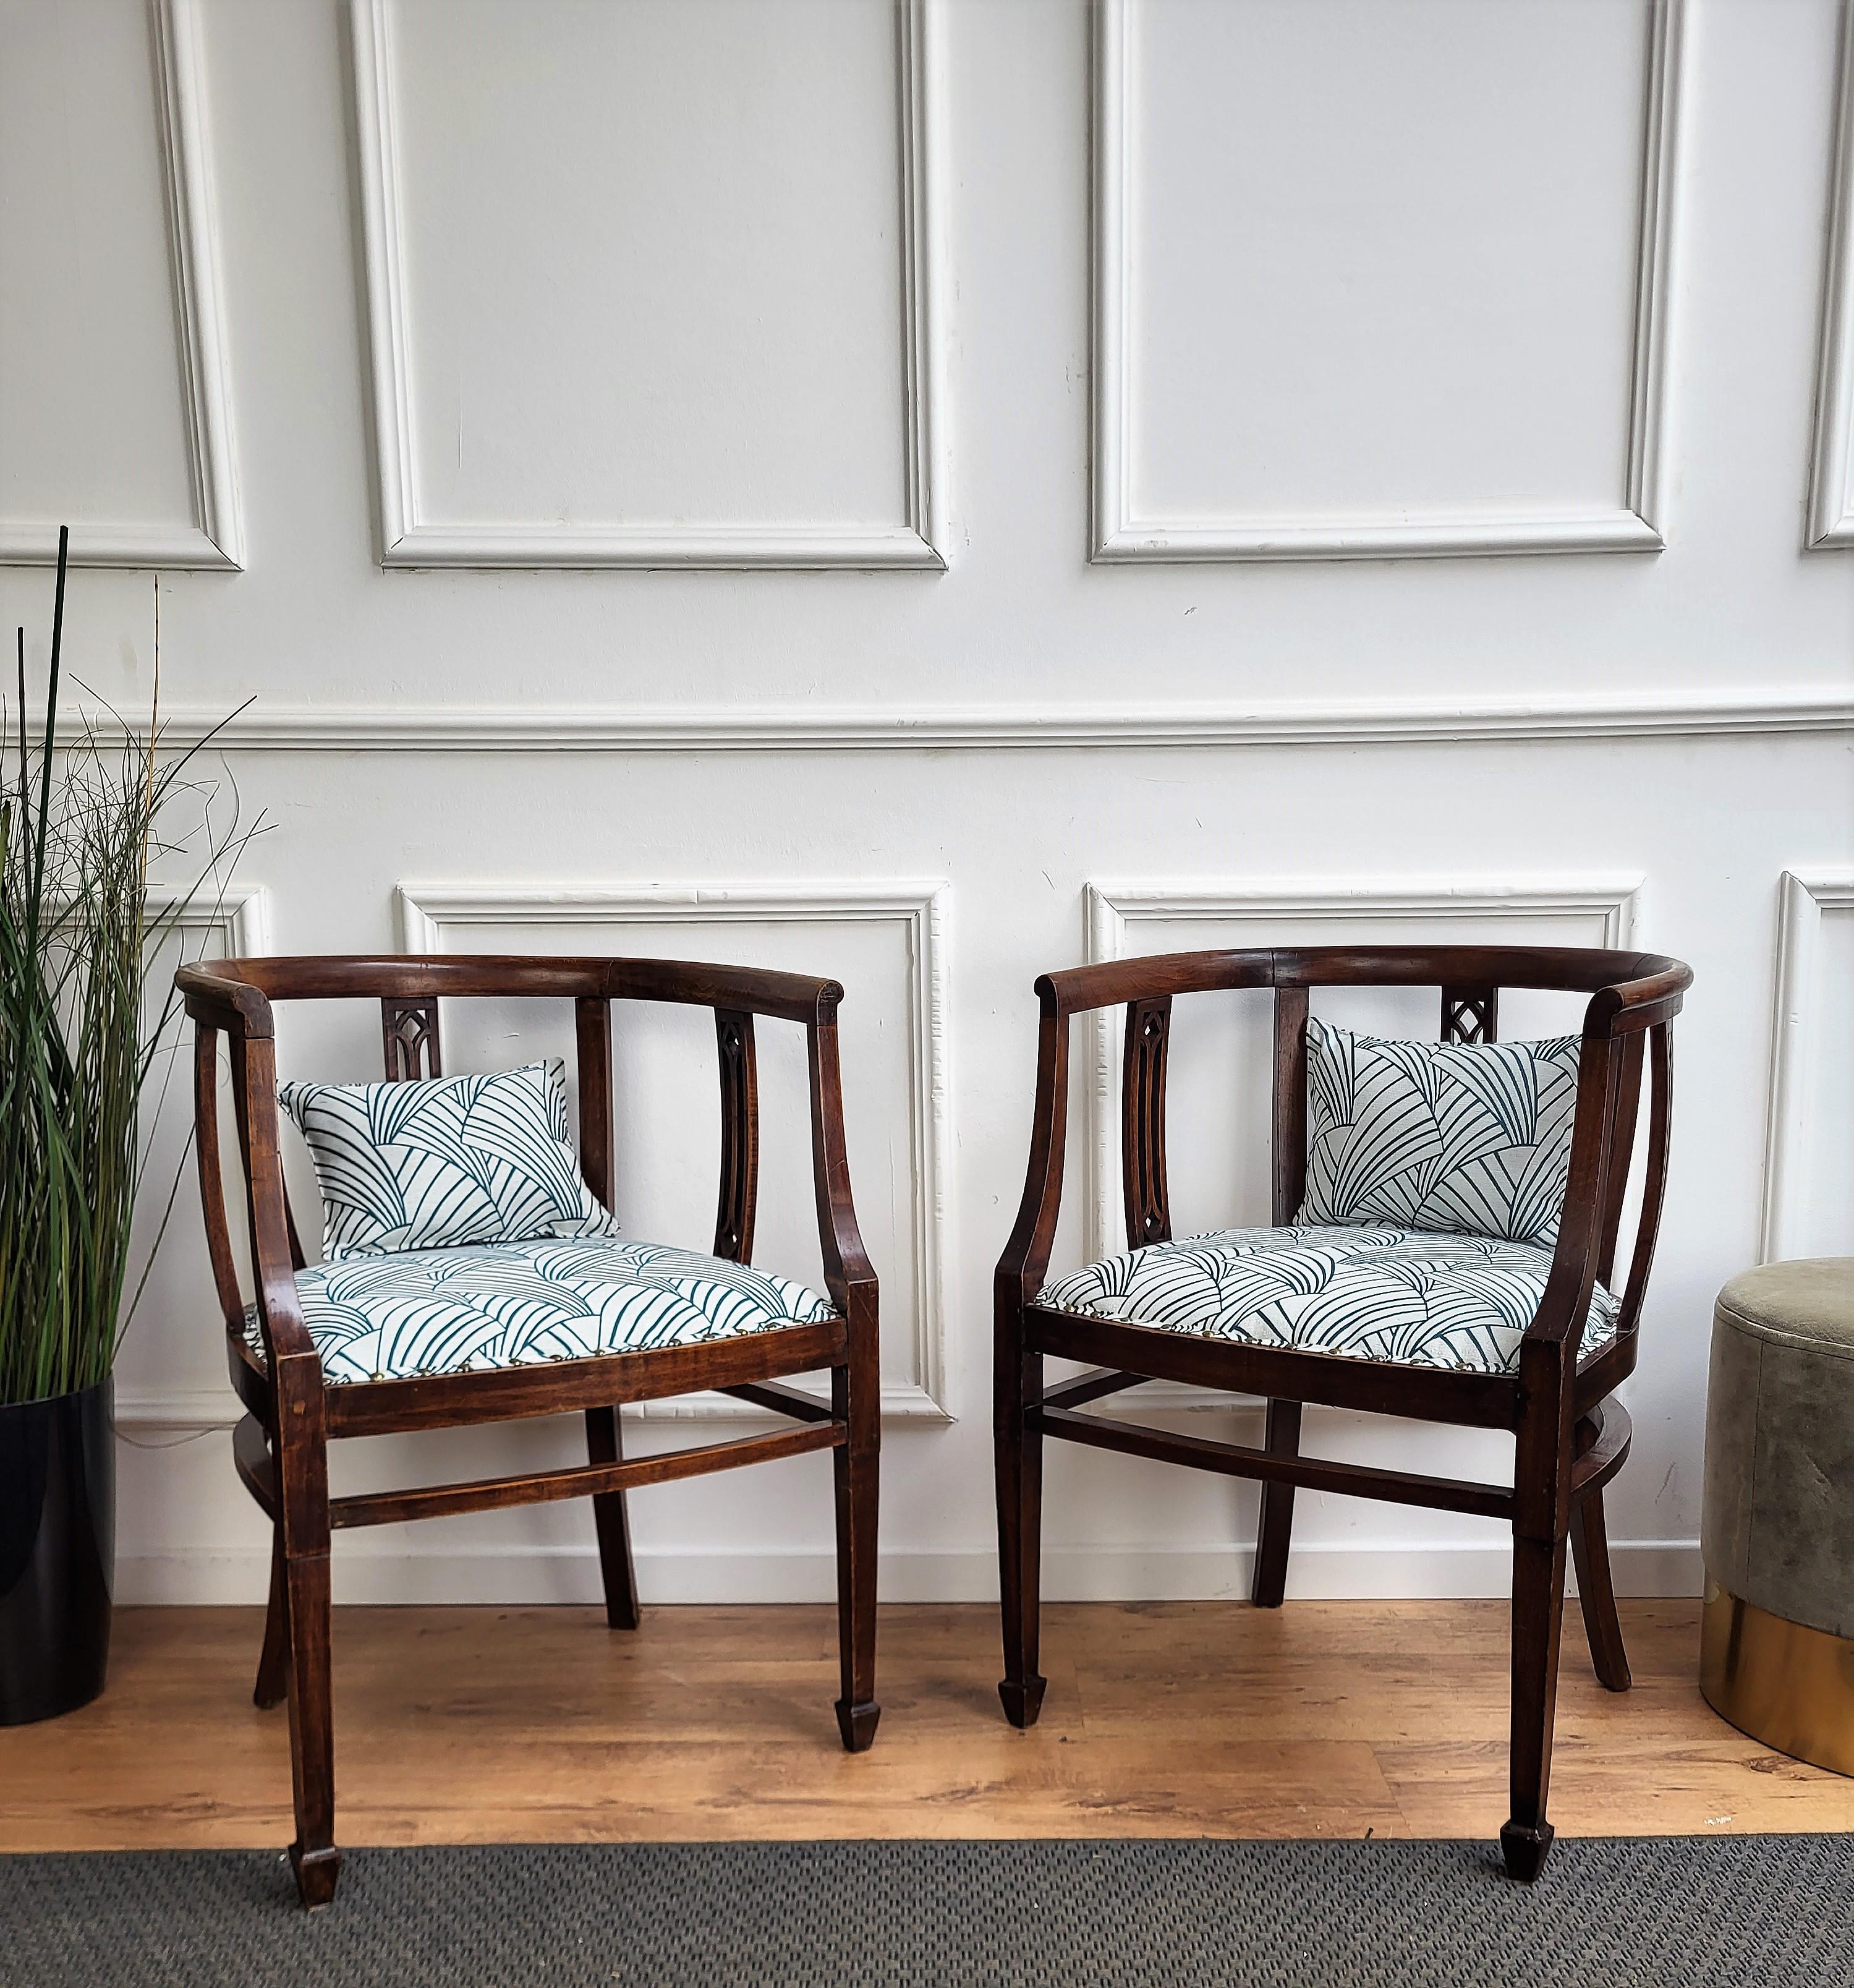 A beautiful and sleek pair of Italian wooden side chairs of fine quality with excellent profile carvings and detail decors, a great and elegant hallway sofa or entrance seating piece due to its slim size. We completely renewed the upholstery with